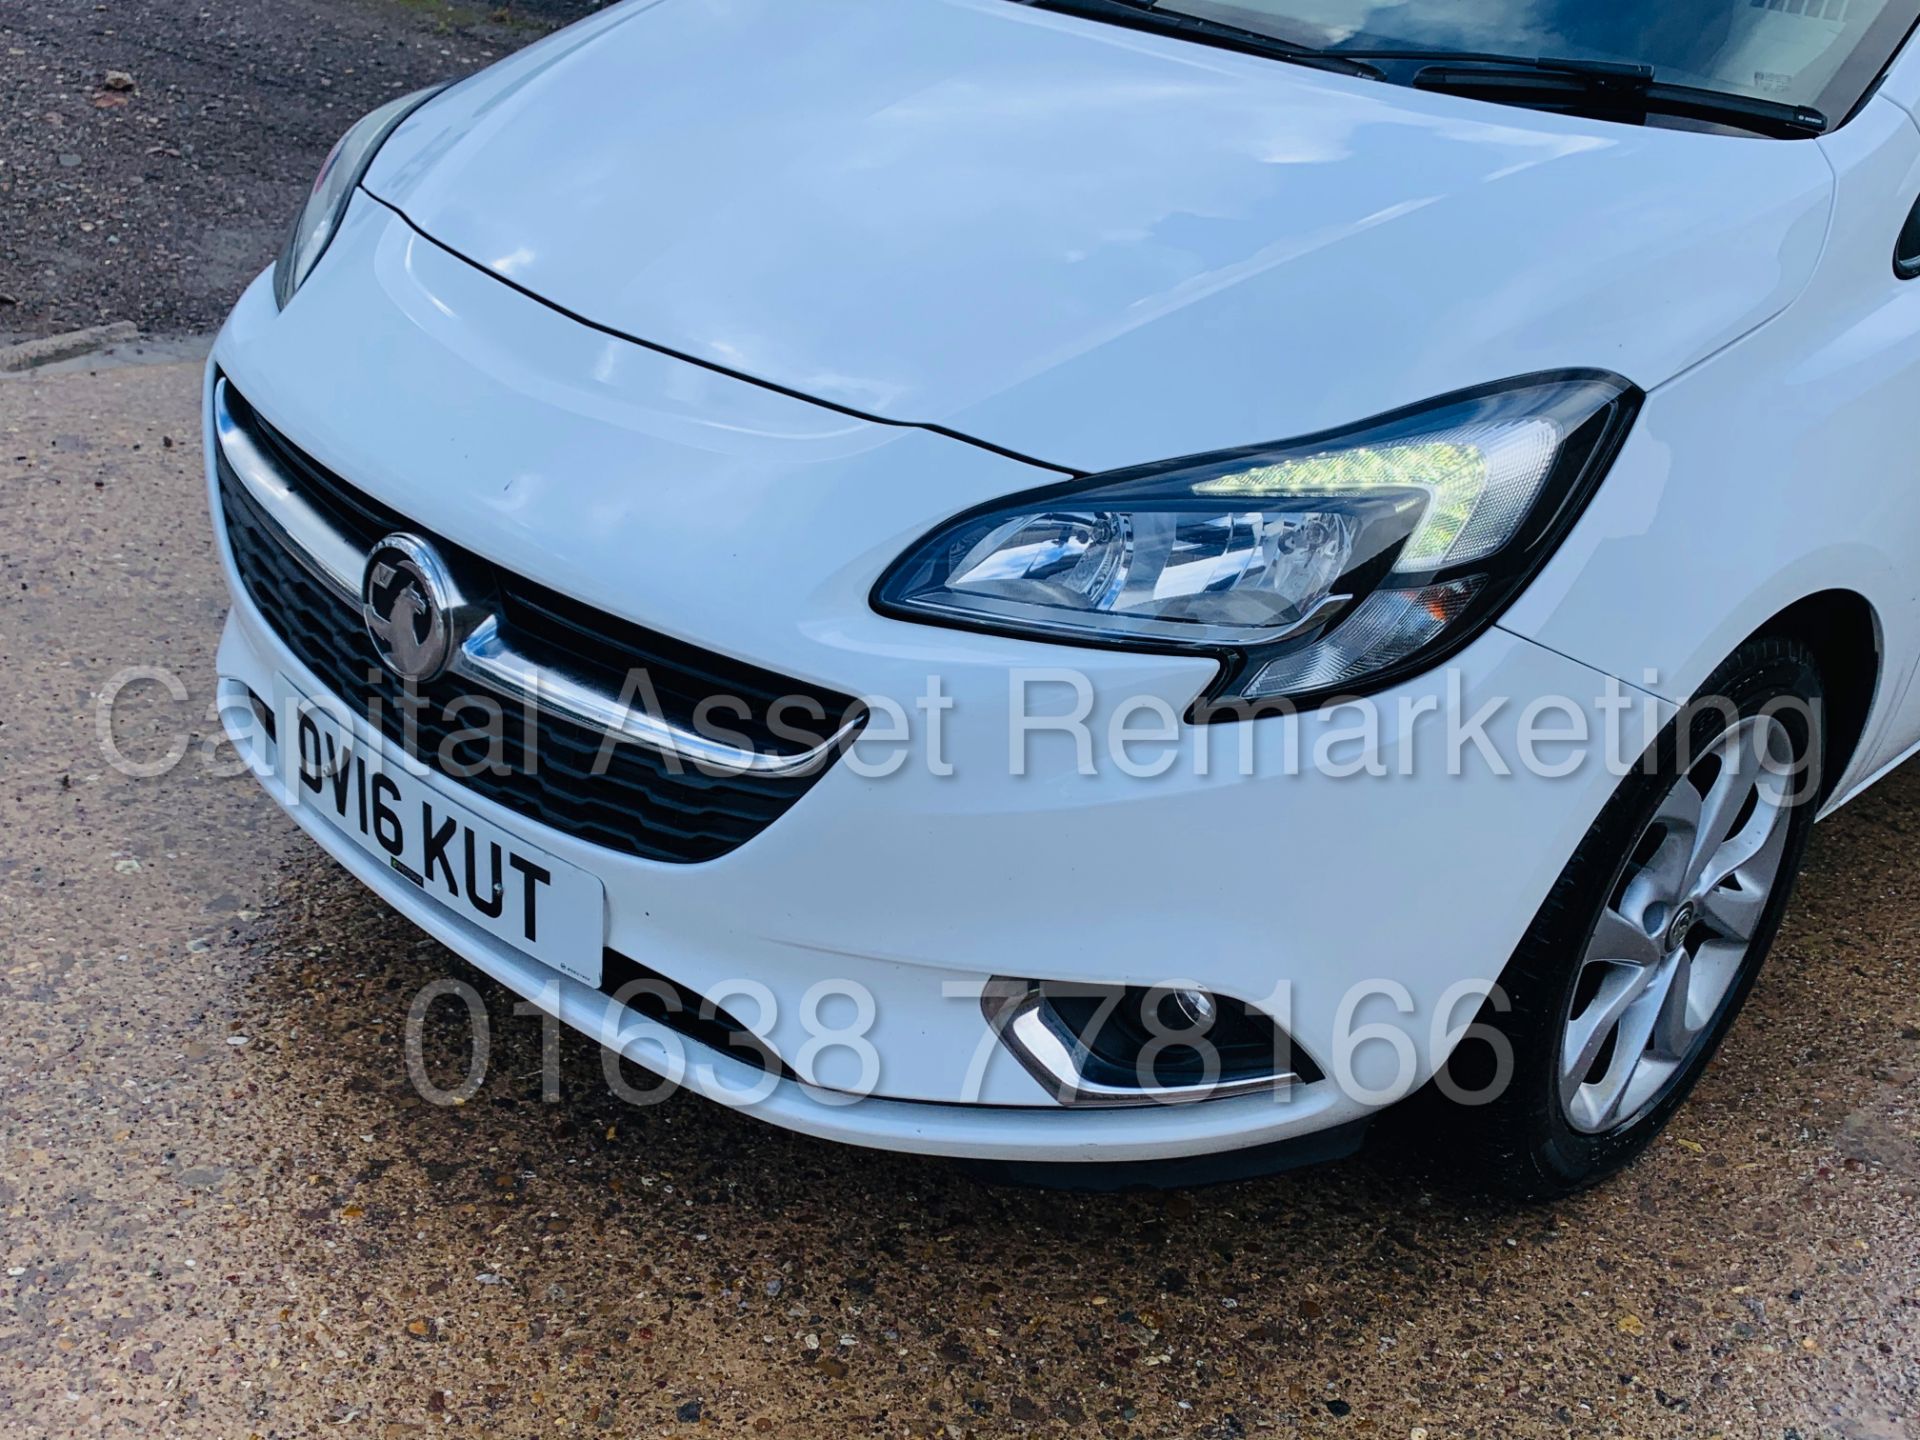 (On Sale) VAUXHALL CORSA *SPORTIVE - VAN* (2016 - NEW MODEL) '95 BHP - 6 SPEED' *A/C* (1 OWNER) - Image 16 of 43